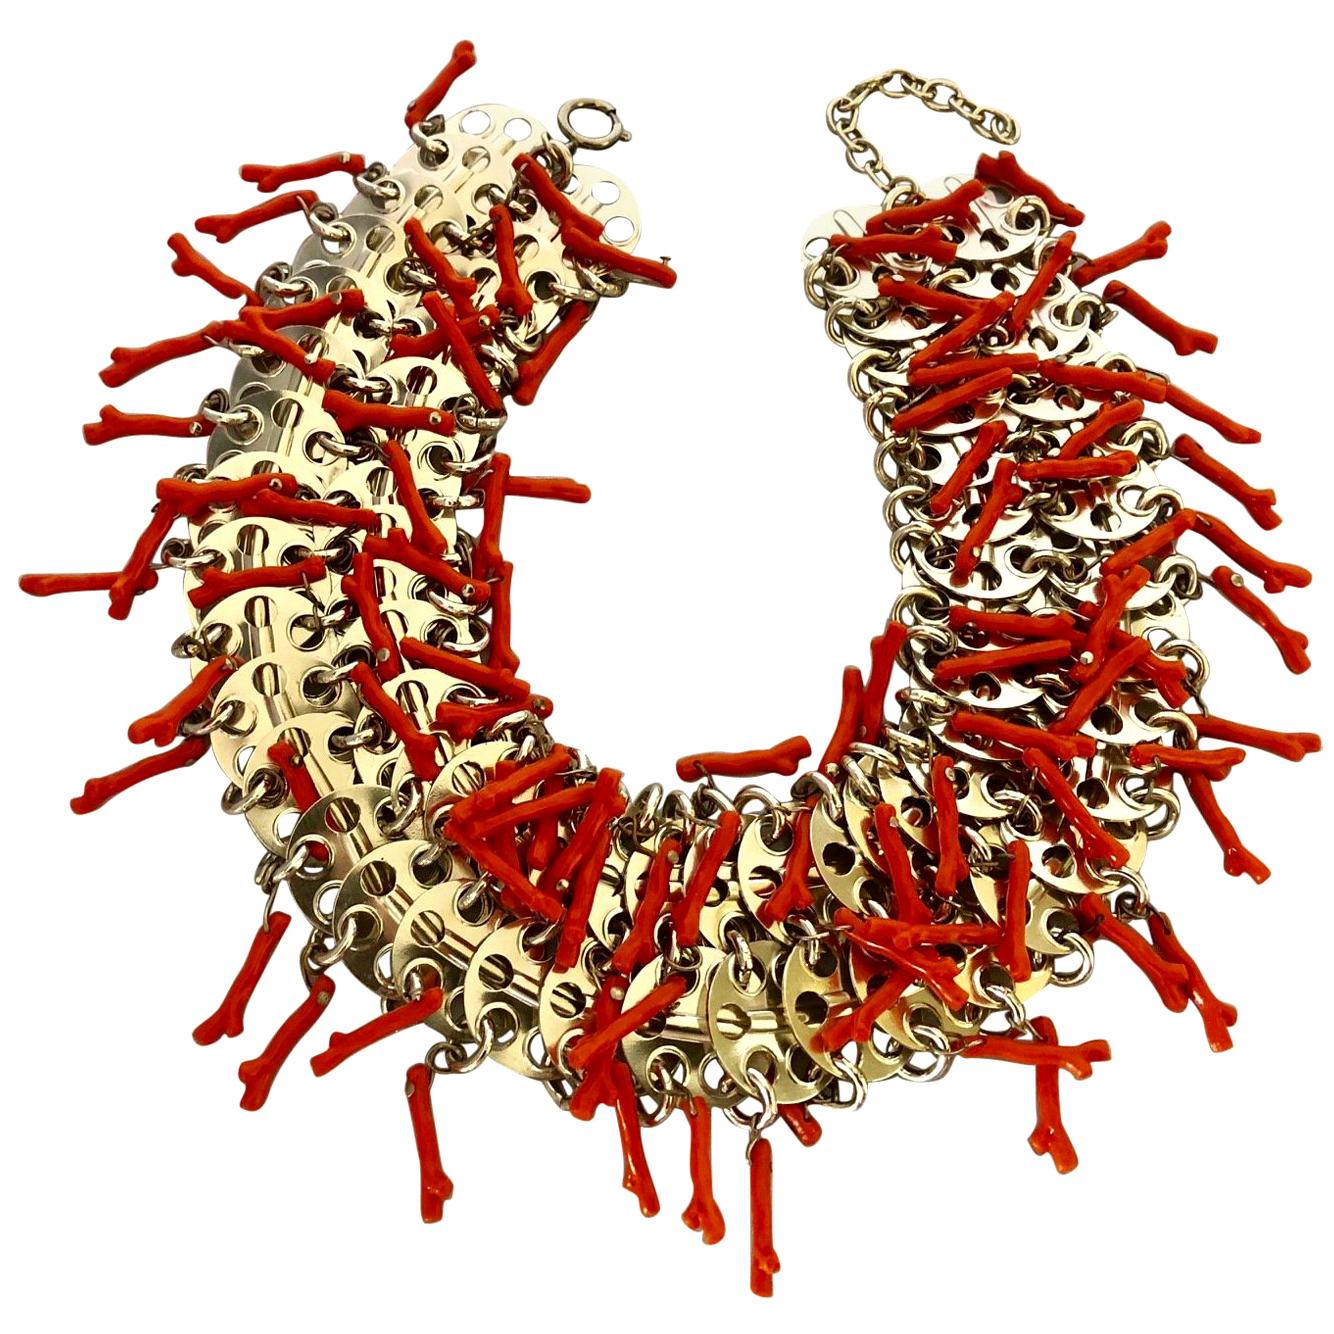  Articulated Architectural Modern Coral  Statement Bib Necklace, Italy 1960s